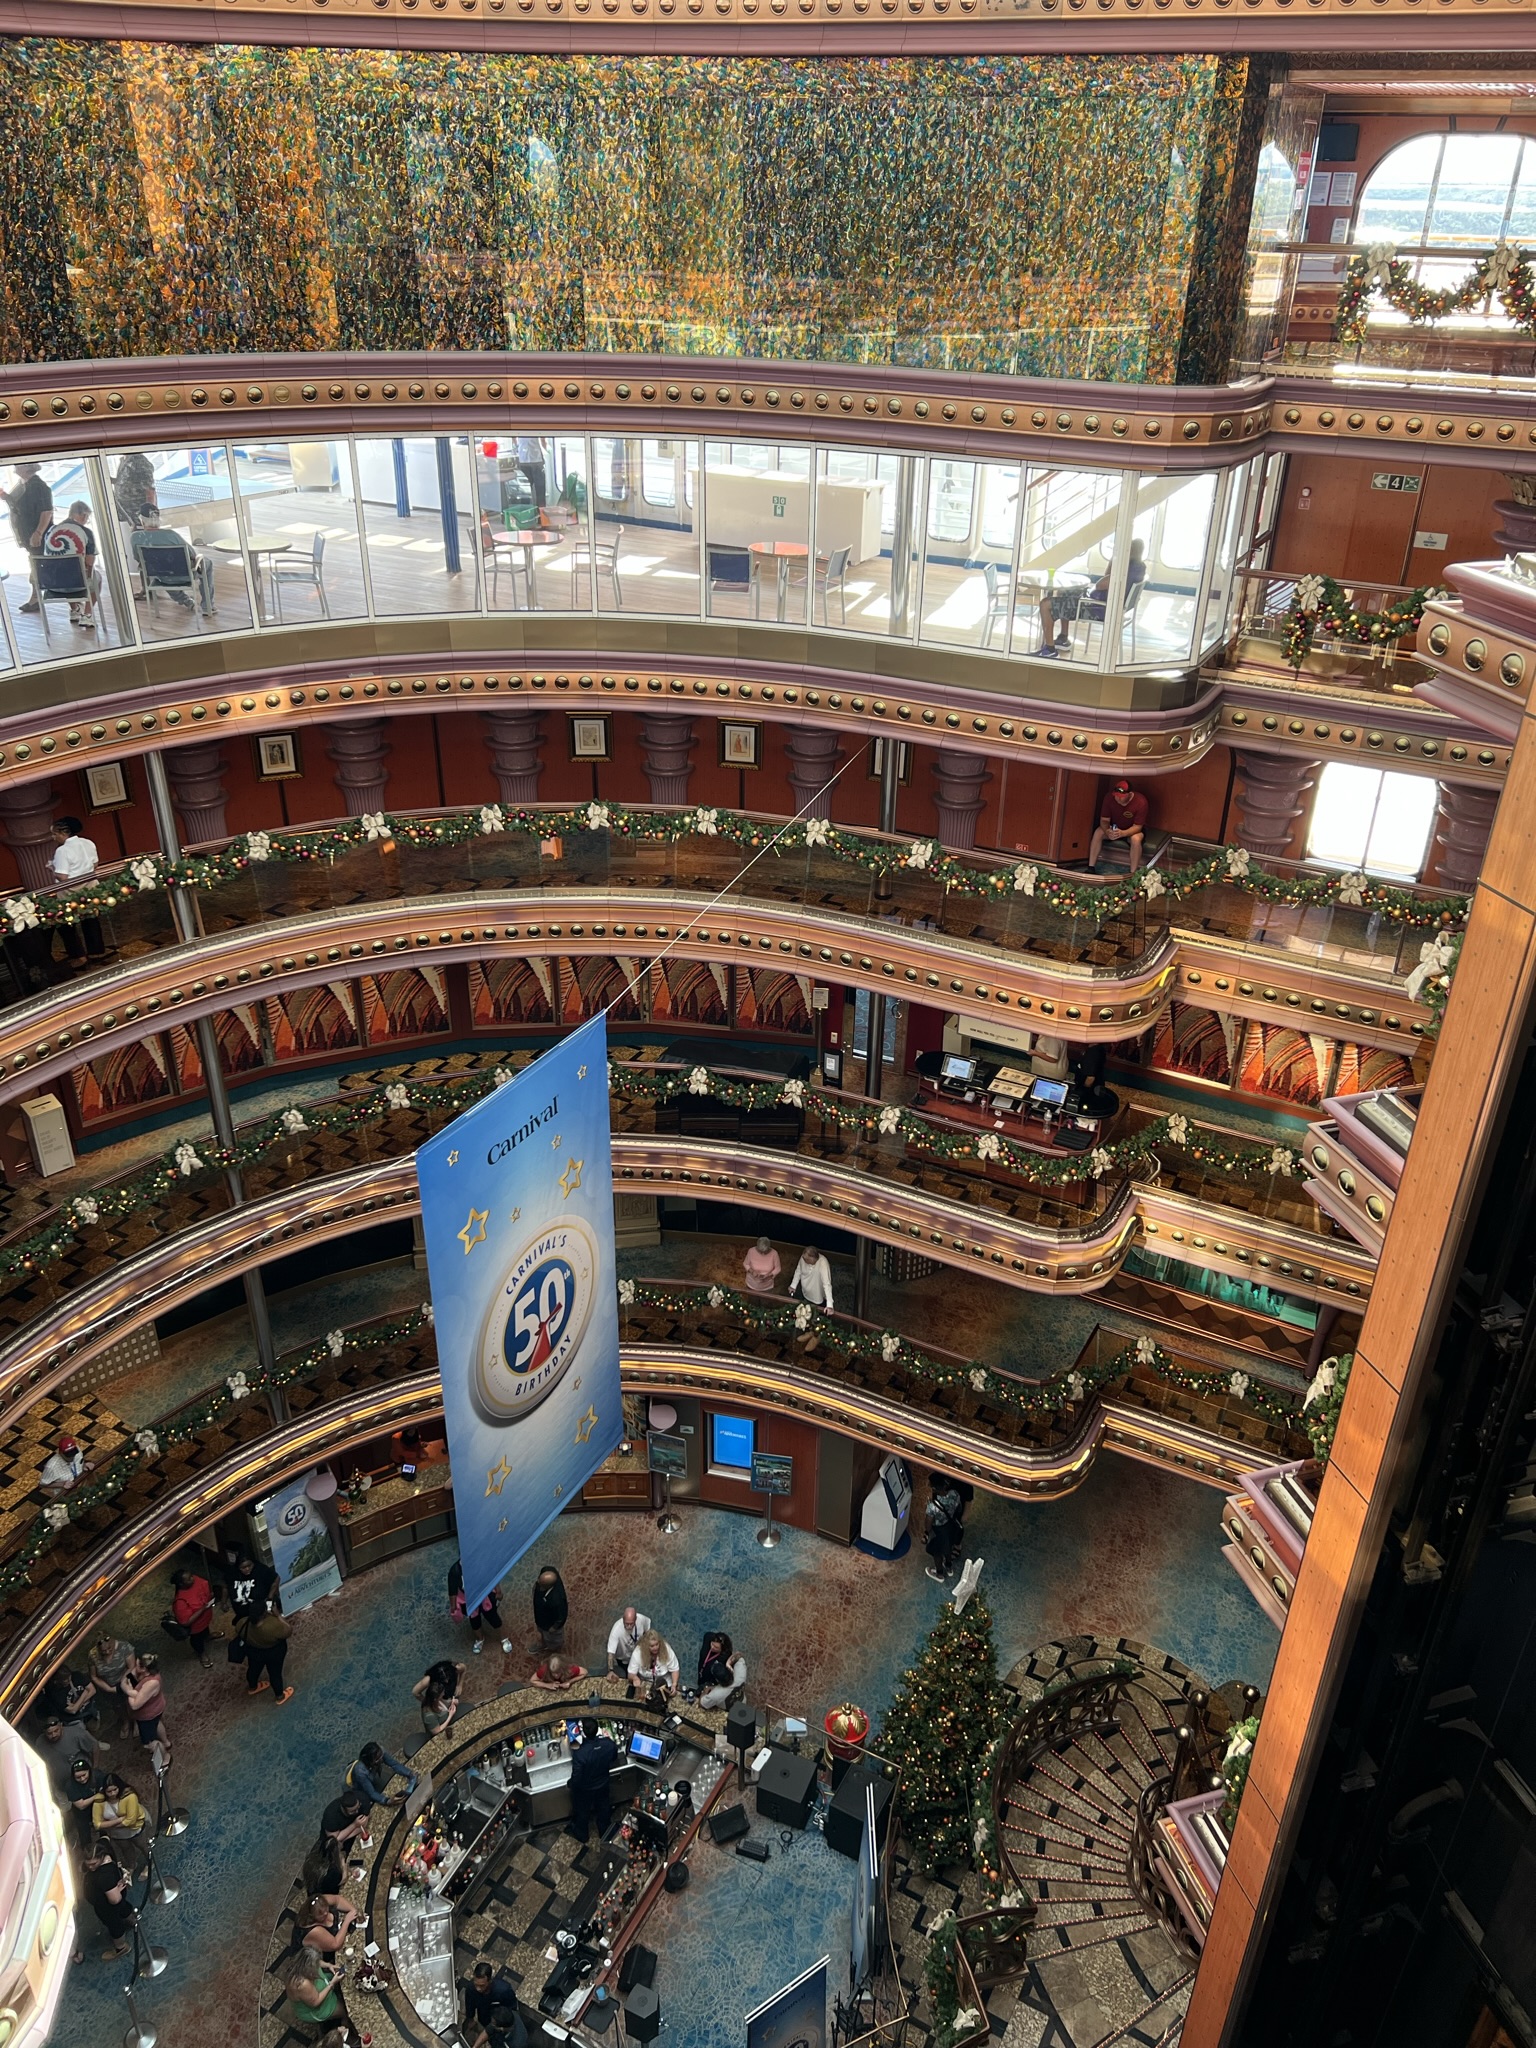 Cruise Shorts - It's Christmas Time on the Carnival Elation and it is Snowing in the Atrium!